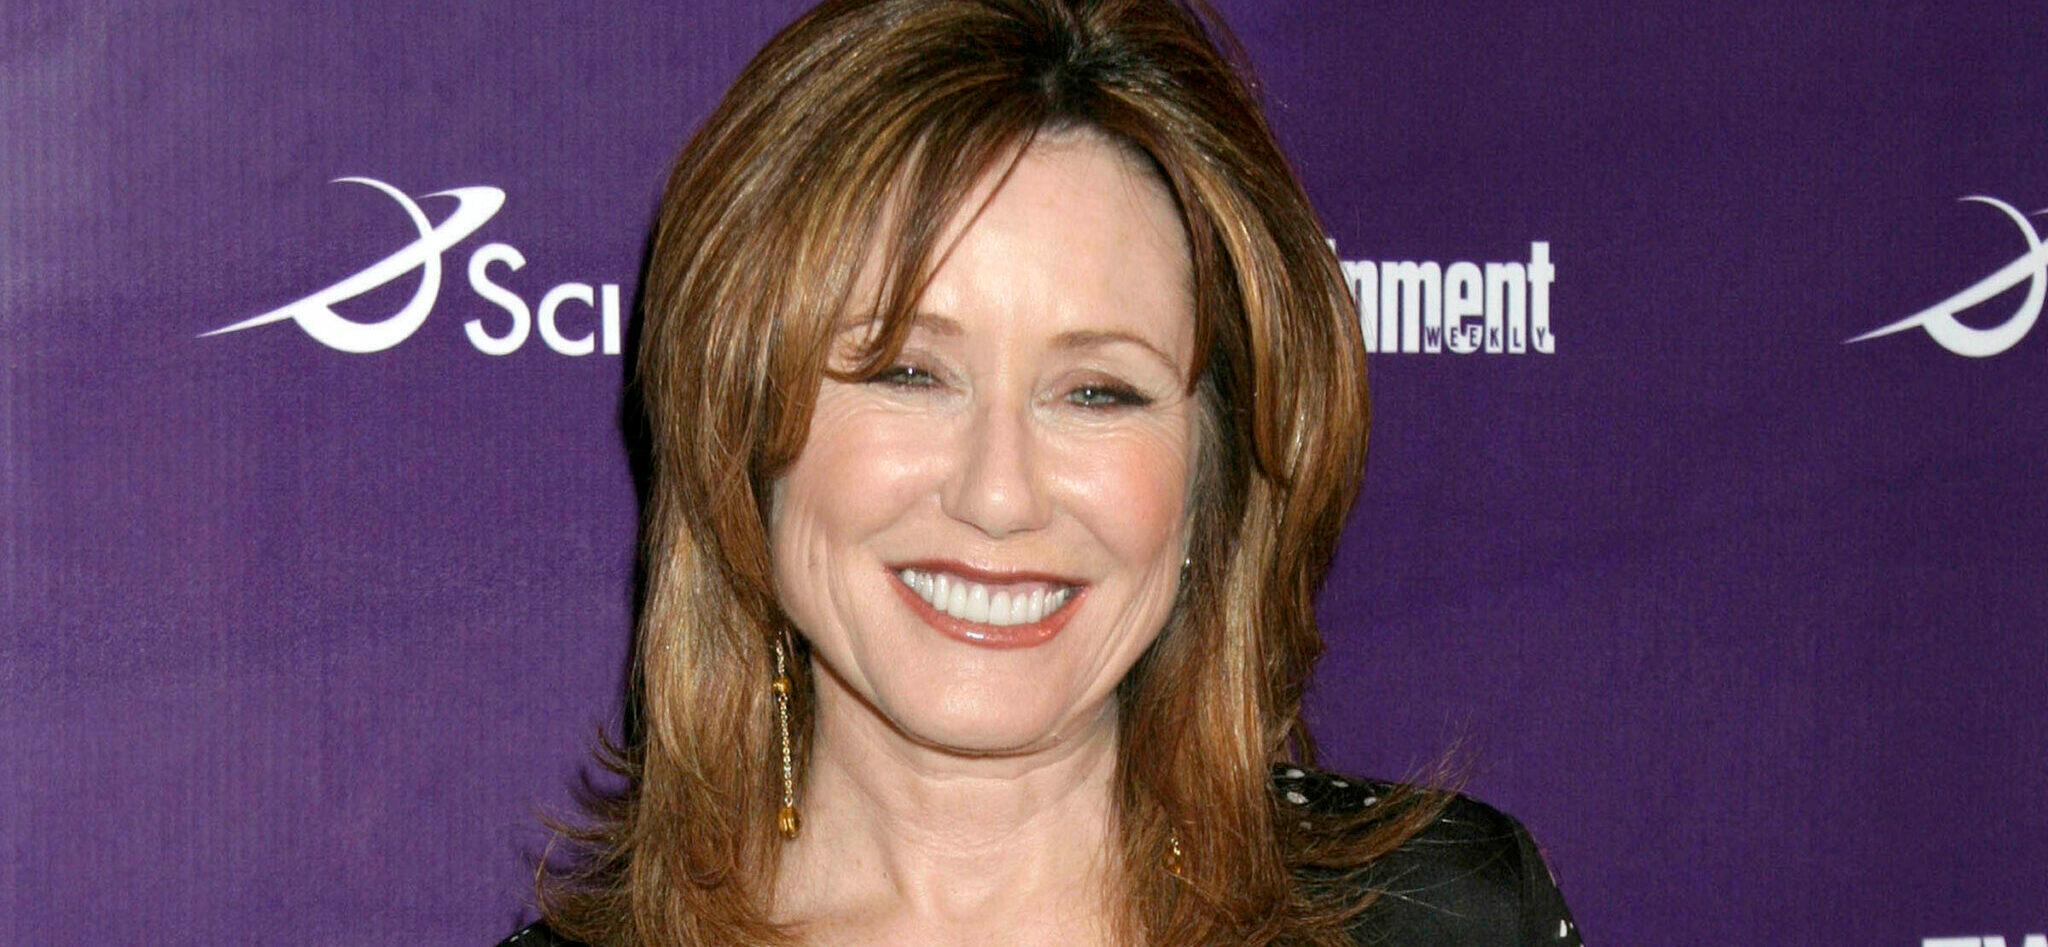 ‘Dances With Wolves’ Mary McDonnell Splits With Husband After 37 Years